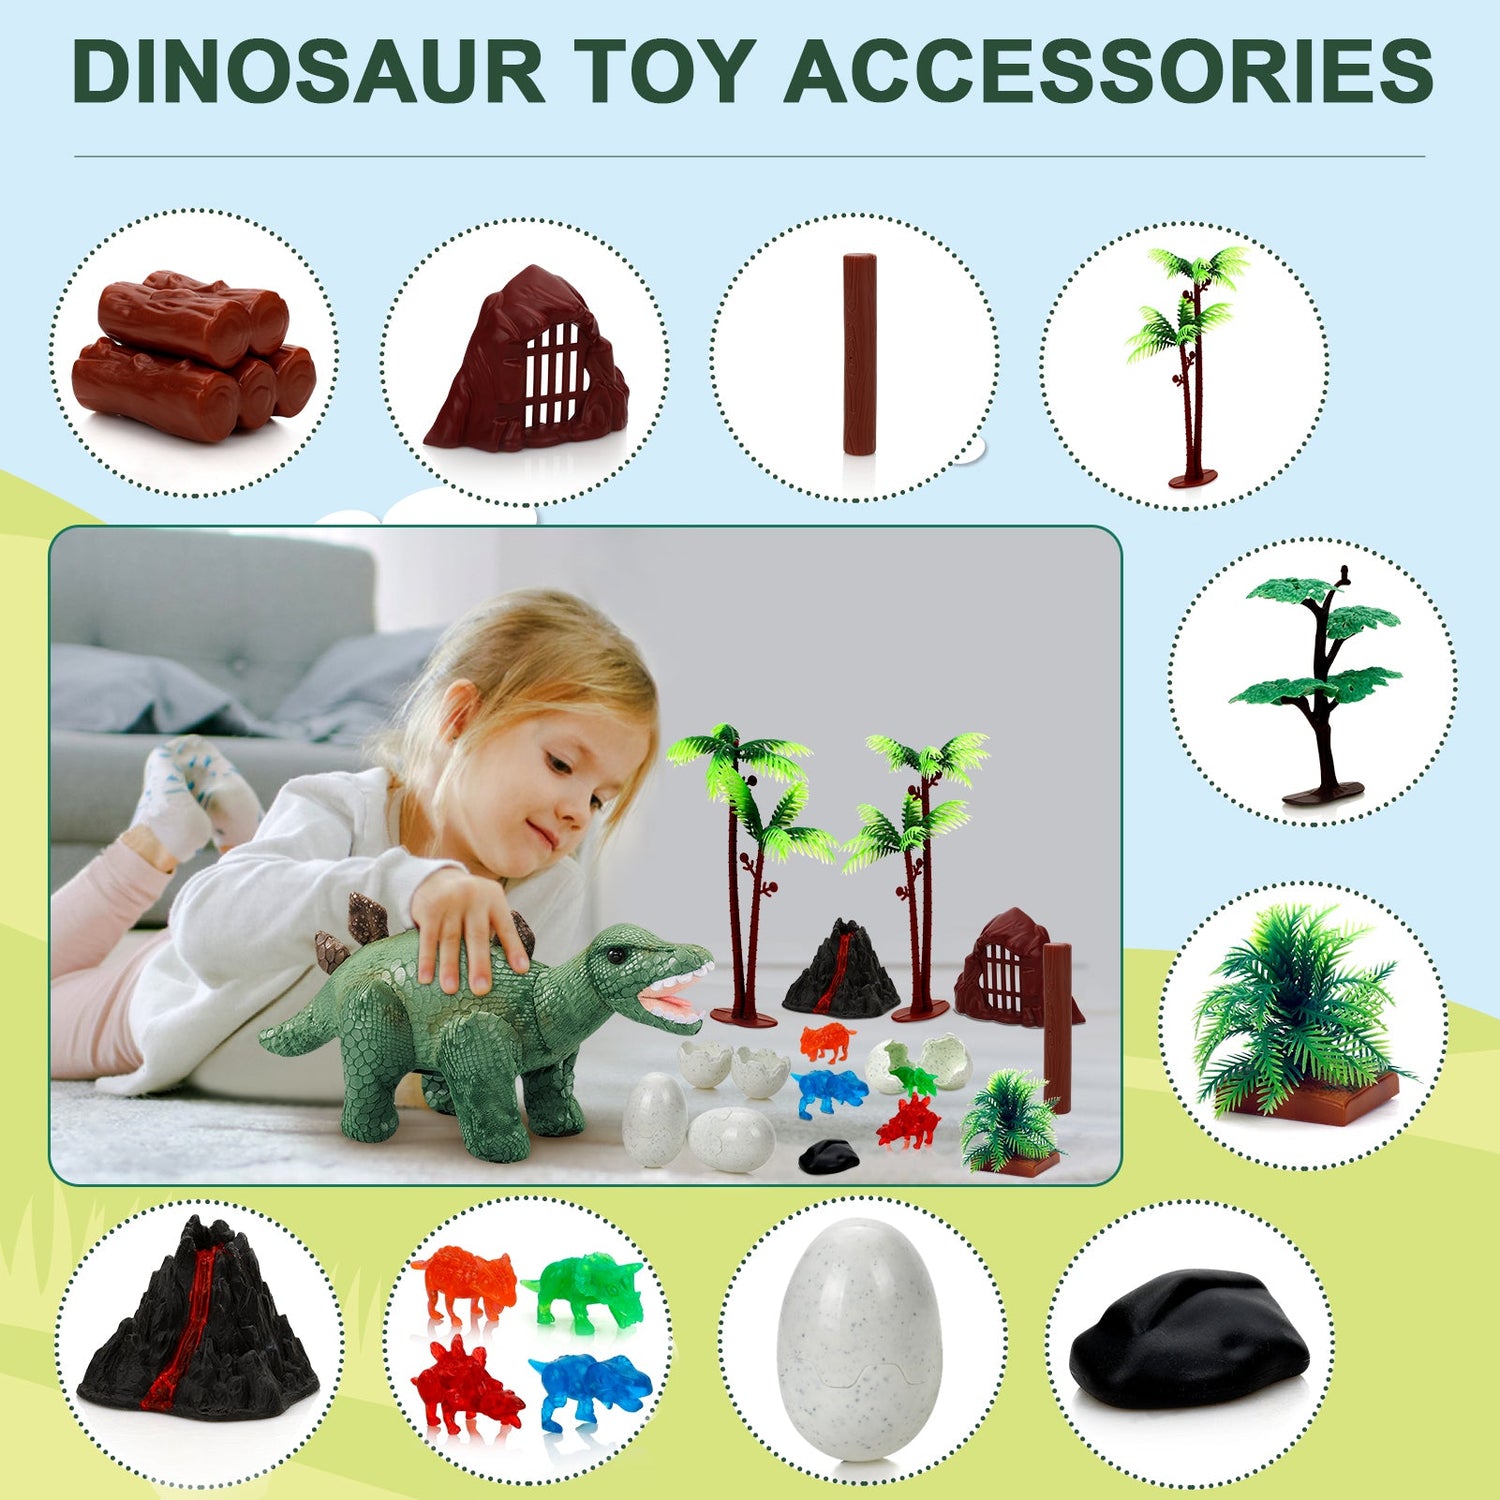 New Remote Control Dinosaur with Jurassic World Toys_5